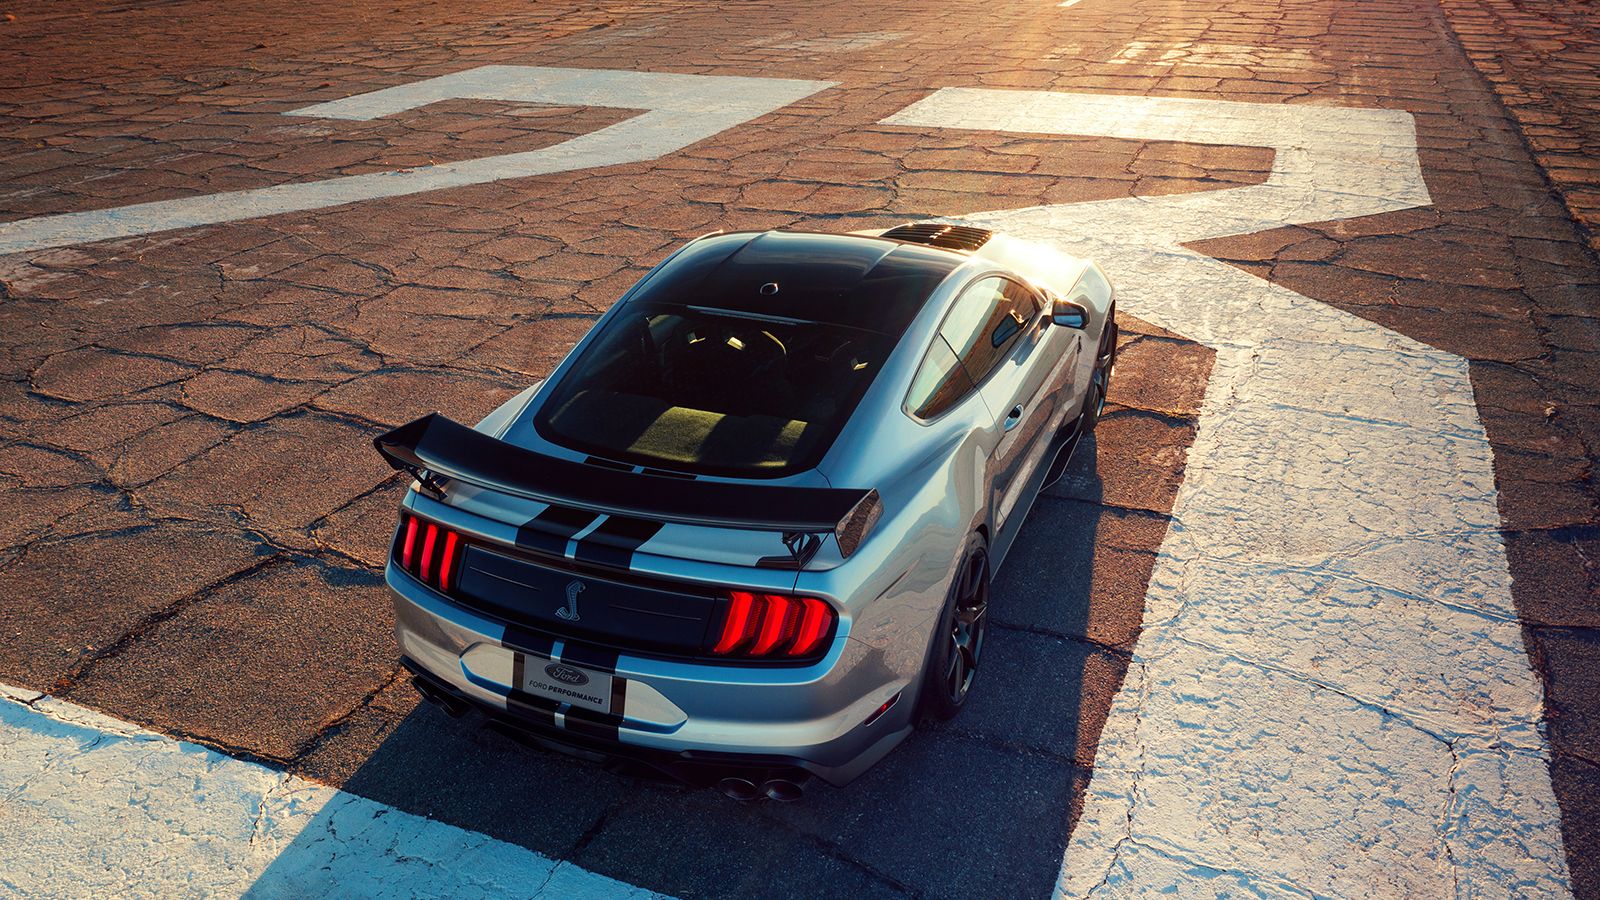 The 2020 Ford Mustang Shelby GT500 Is 760 HP of Pony Royalty